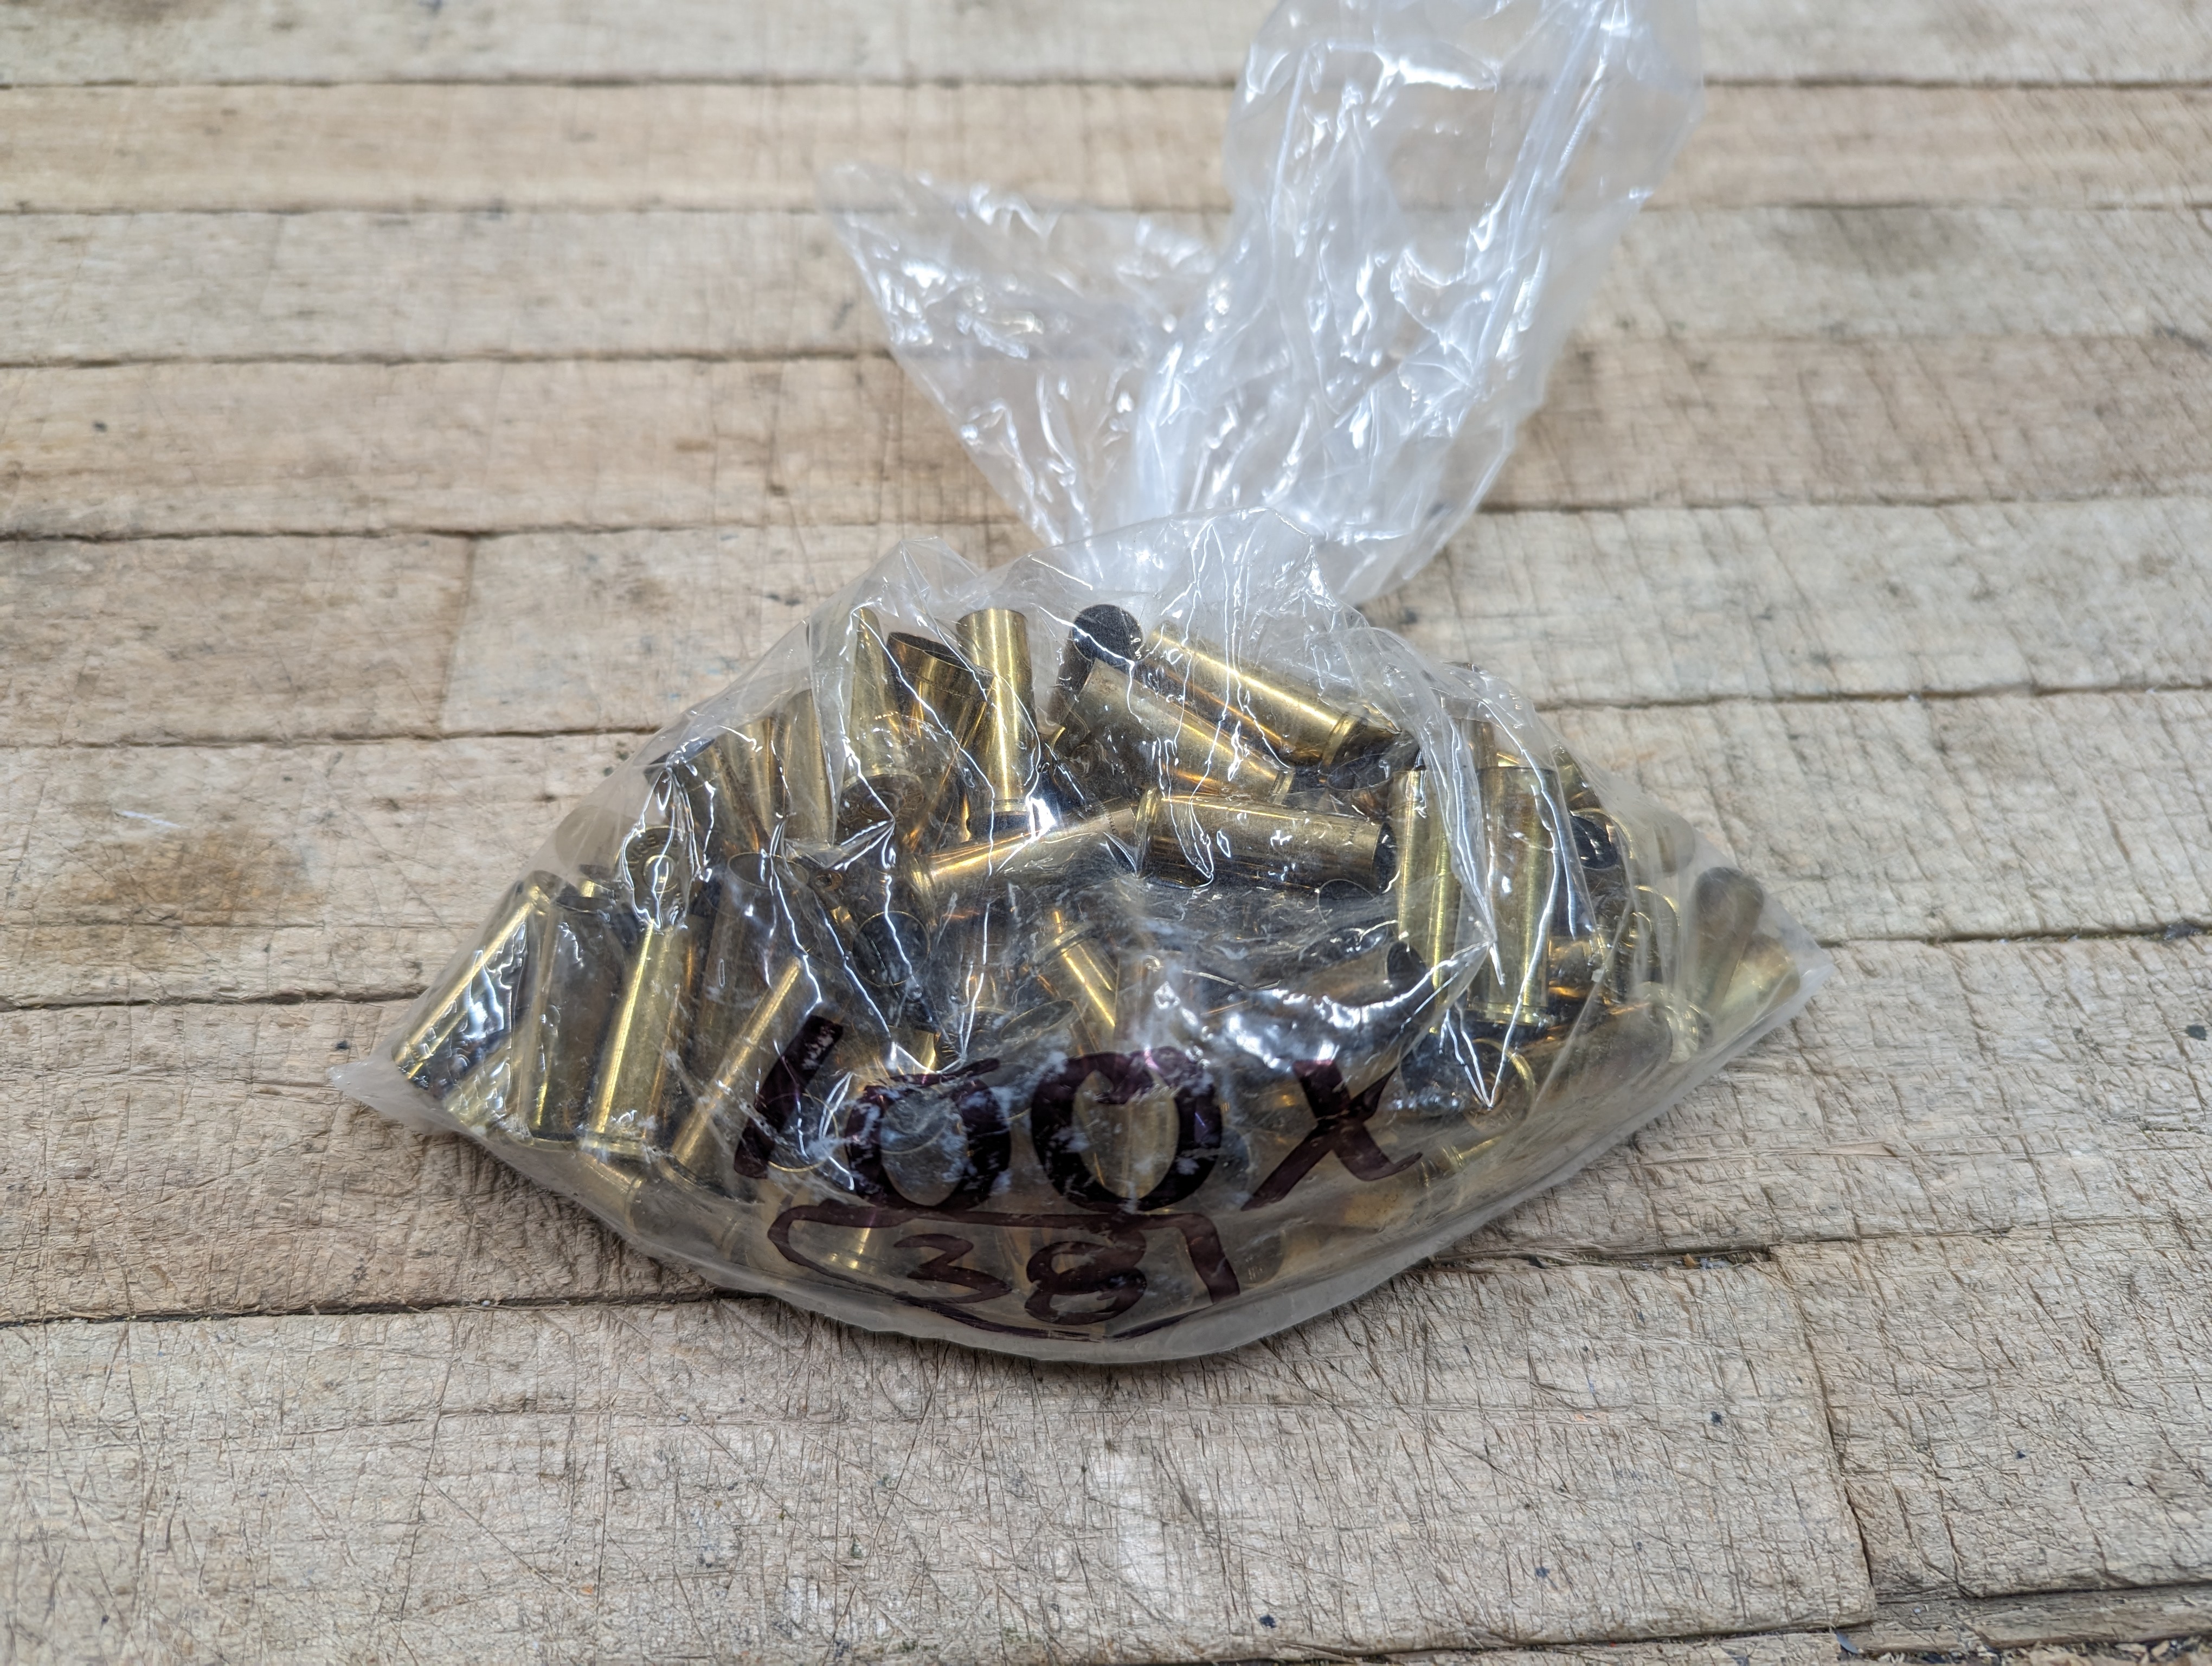 9mm Brass For Sale, 9mm Once Fired Brass